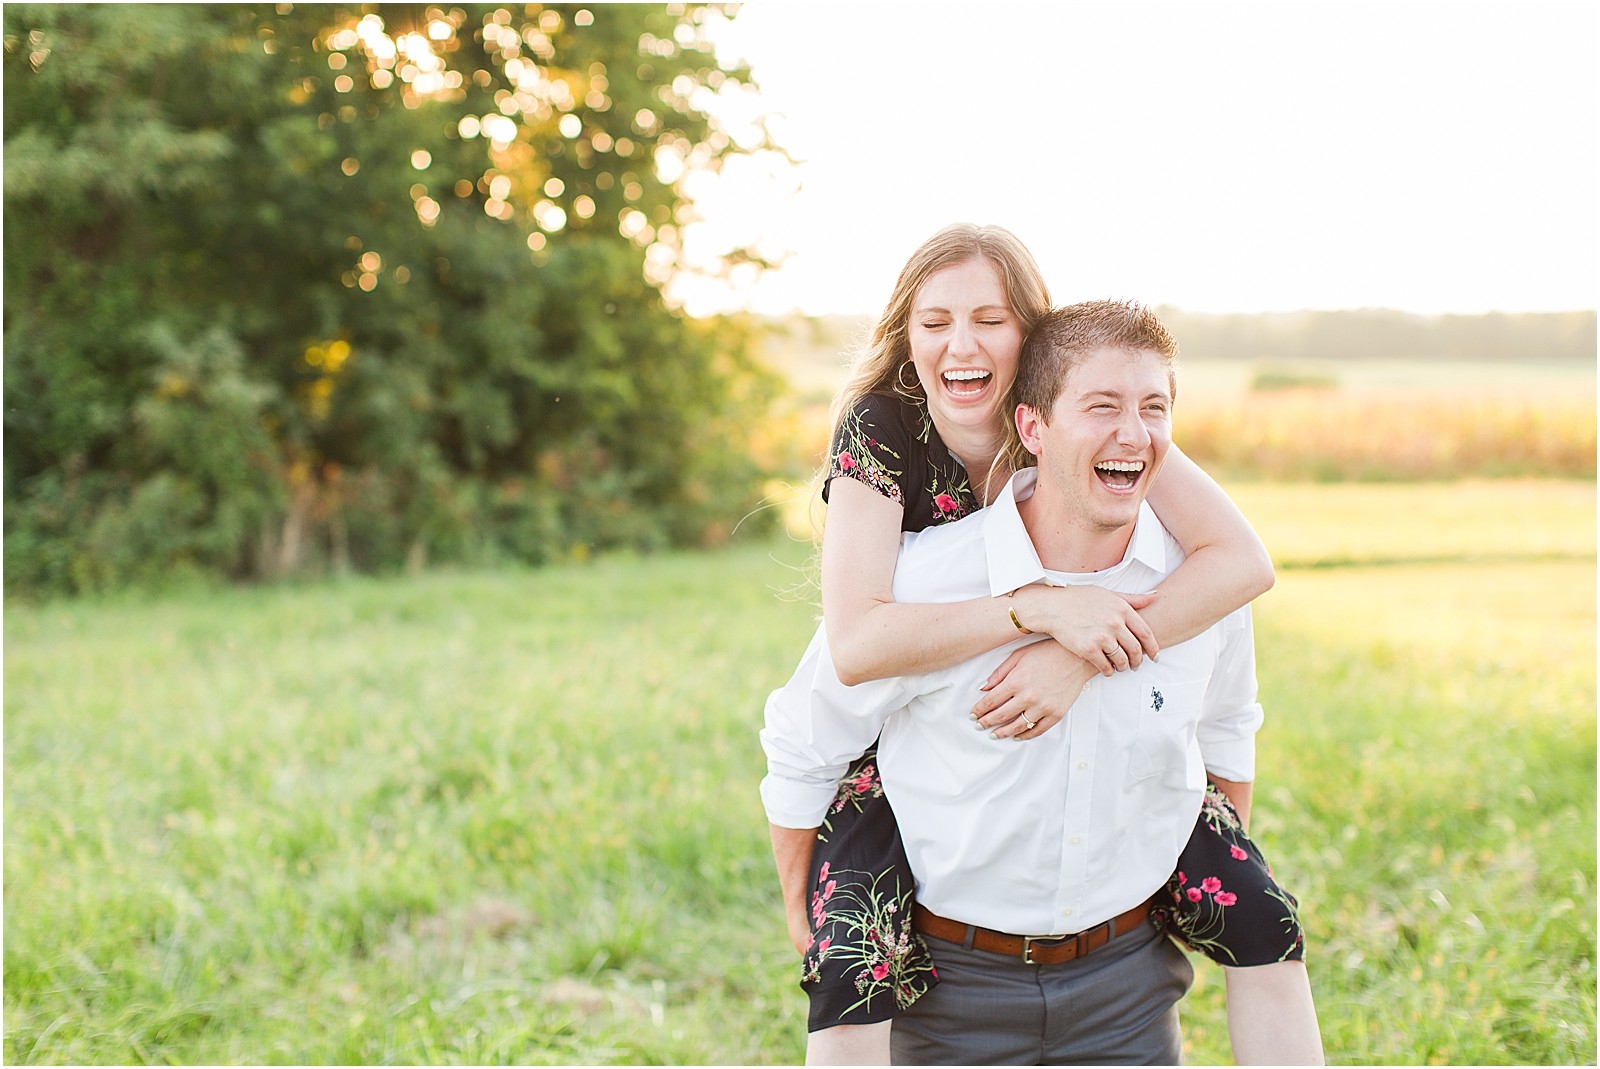 A Jasper Indiana Engagement Session | Tori and Kyle | Bret and Brandie Photography035.jpg